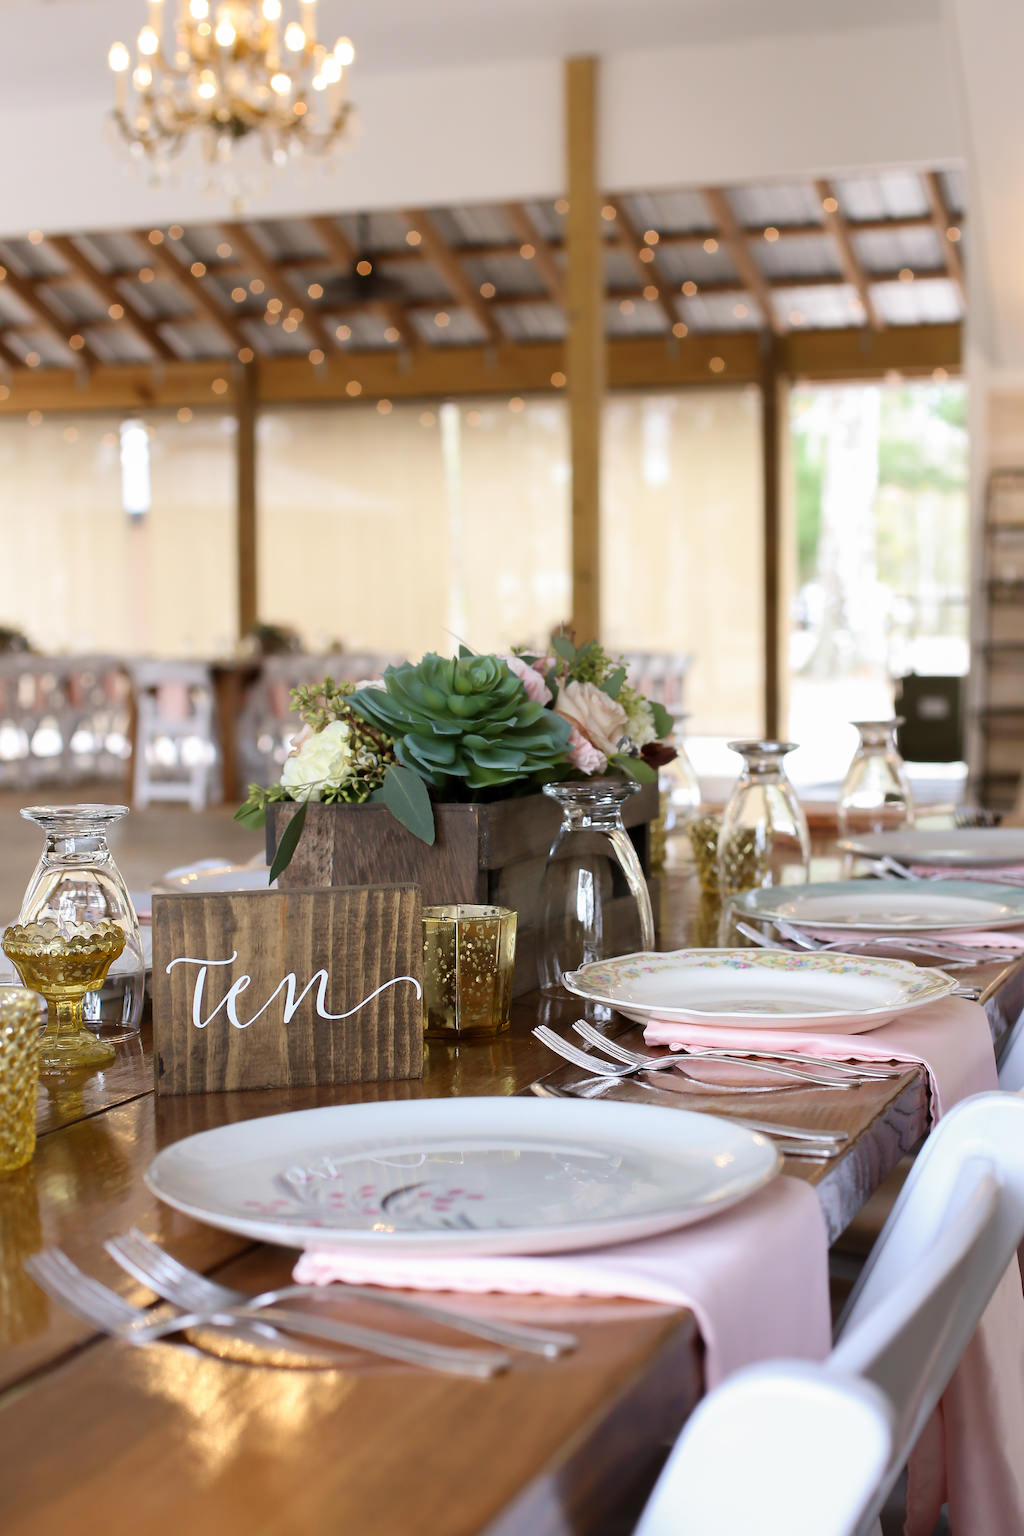 Rustic Inspired Wedding Reception Decor, Long Wooden Feasting Table with Antique China Plates, Blush Pink Linens, Wooden Table Number Sign, Wooden Planter Box with Succulent, Roses and Greenery | Tampa Bay Wedding Photographer Lifelong Photography Studio